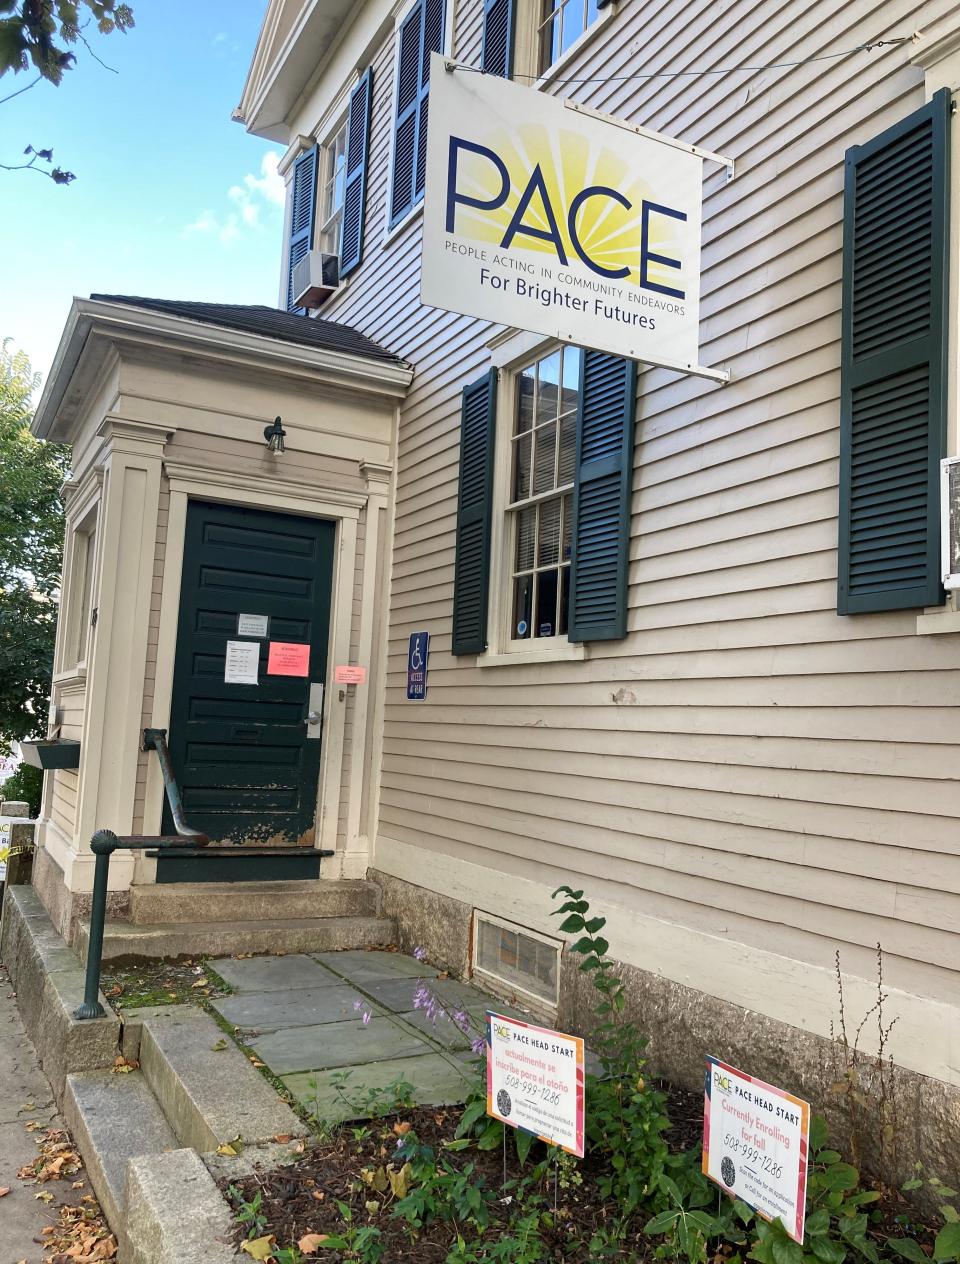 PACE stands for People Acting in Community Endeavors For Brighter Futures.